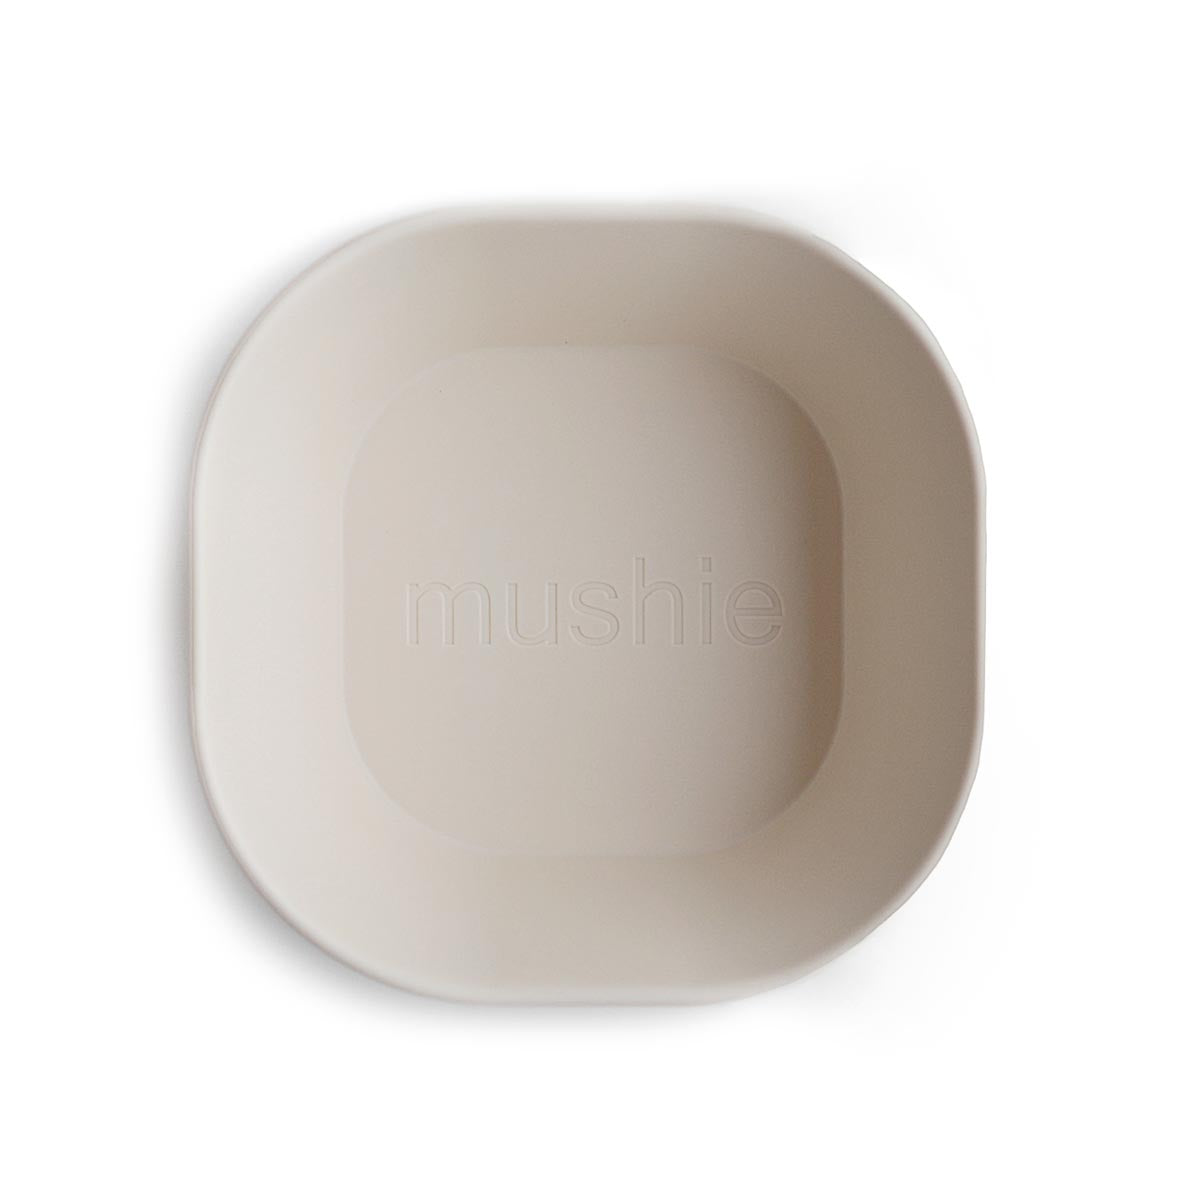 Mushie Square Dinner Bowls 2 Pack